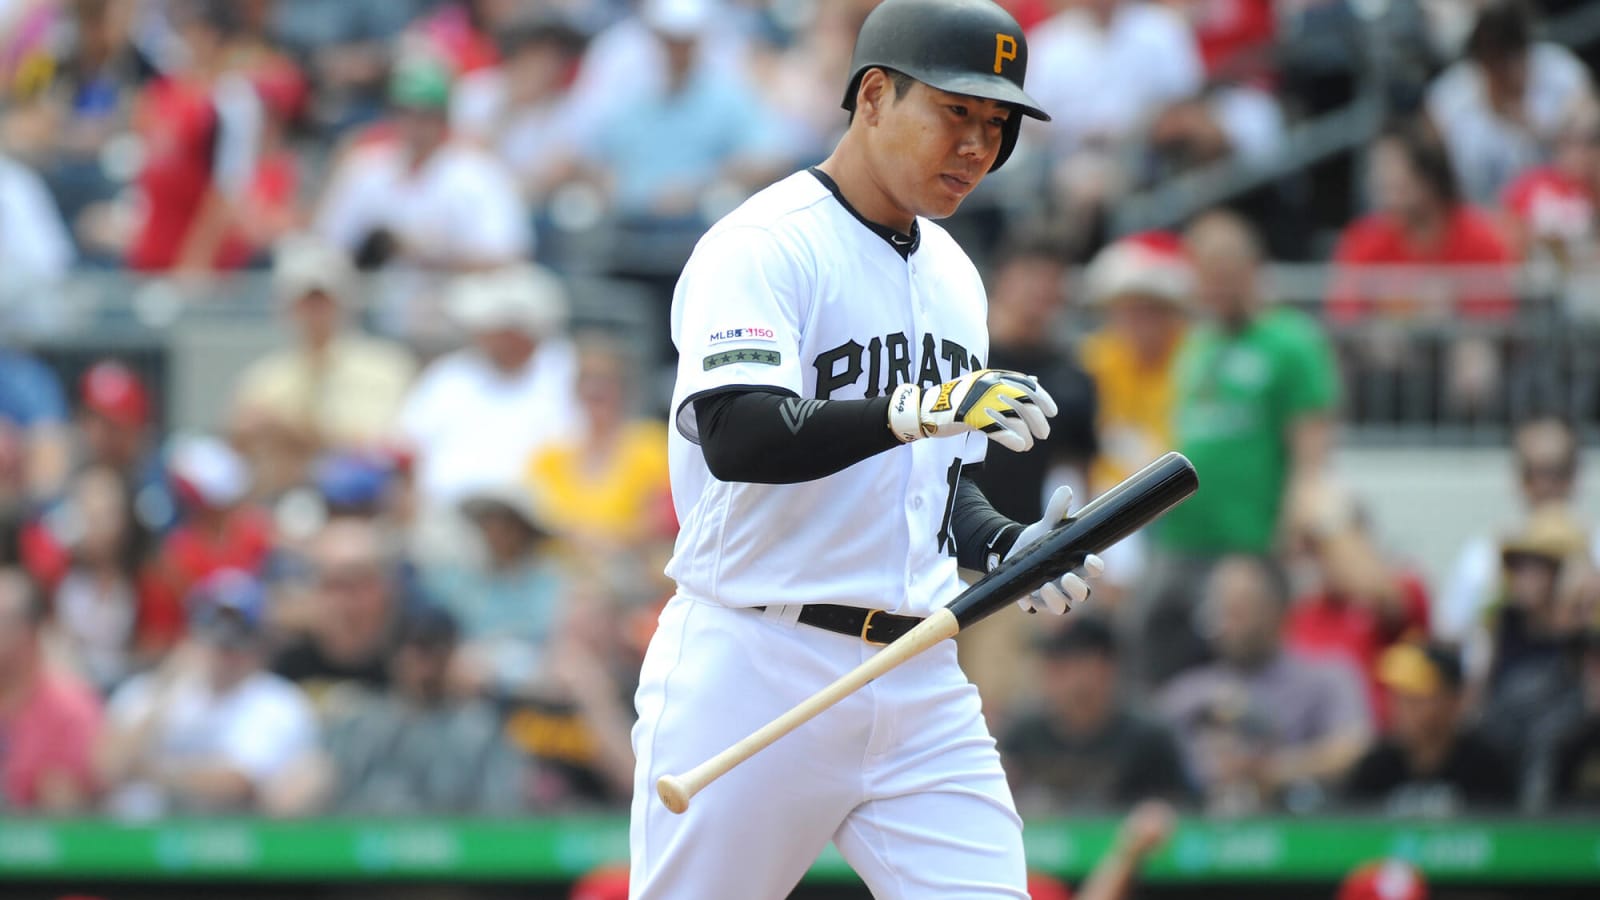 Watch: Ex-Bucco Jung Ho Kang Catches Foul Ball at Pirates/Padres